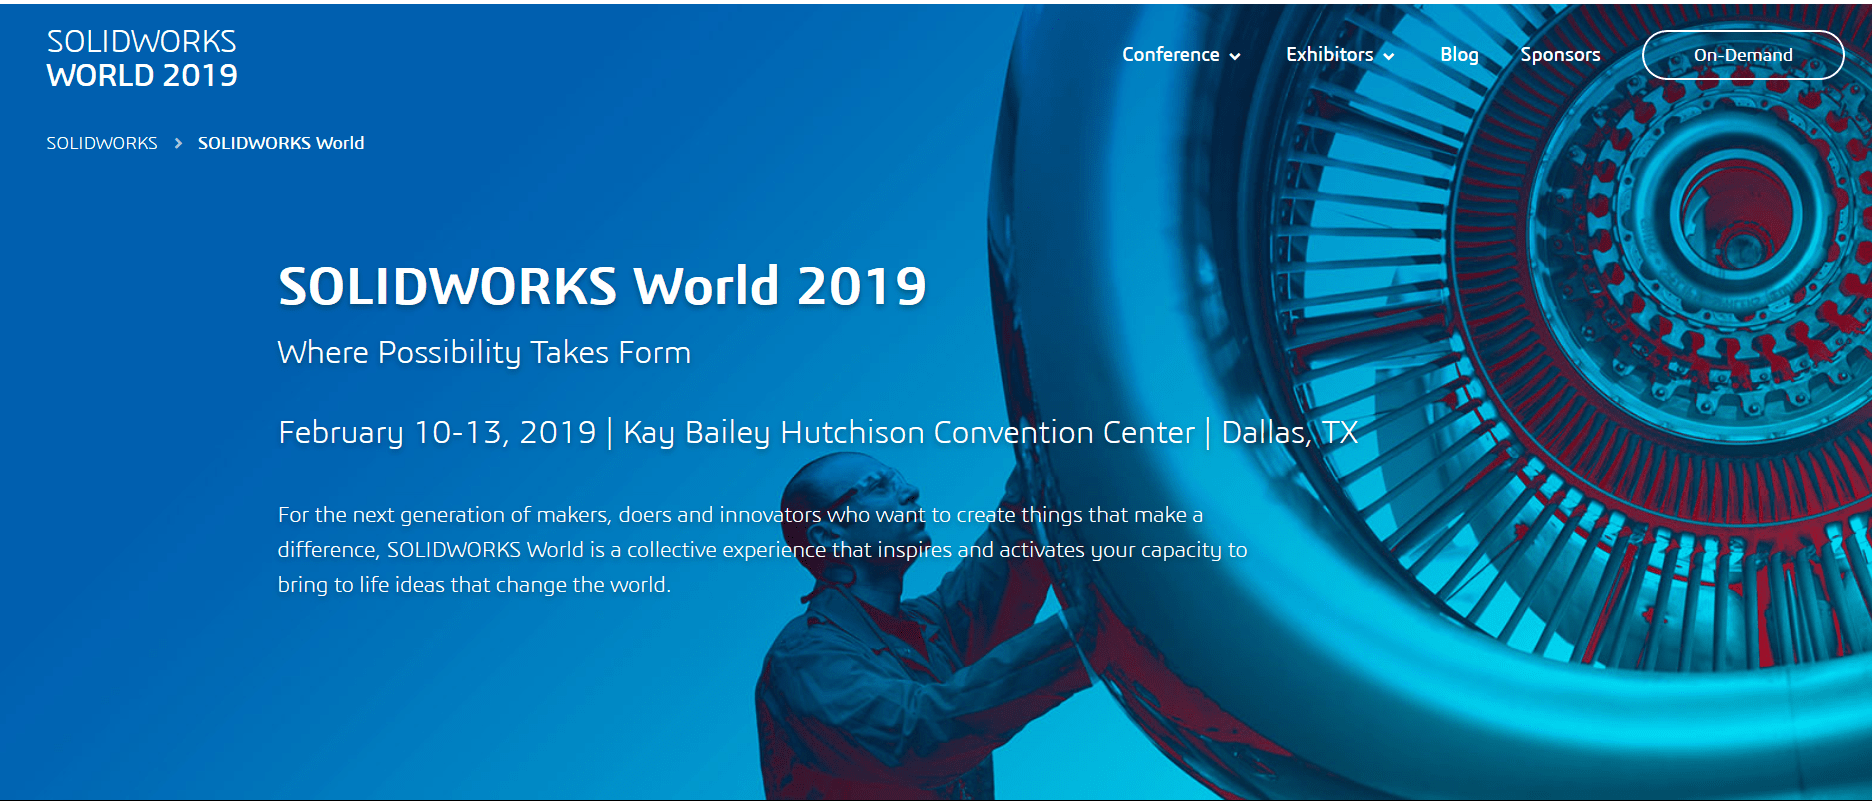 , Interesting takeaways from SOLIDWORKS World 2019